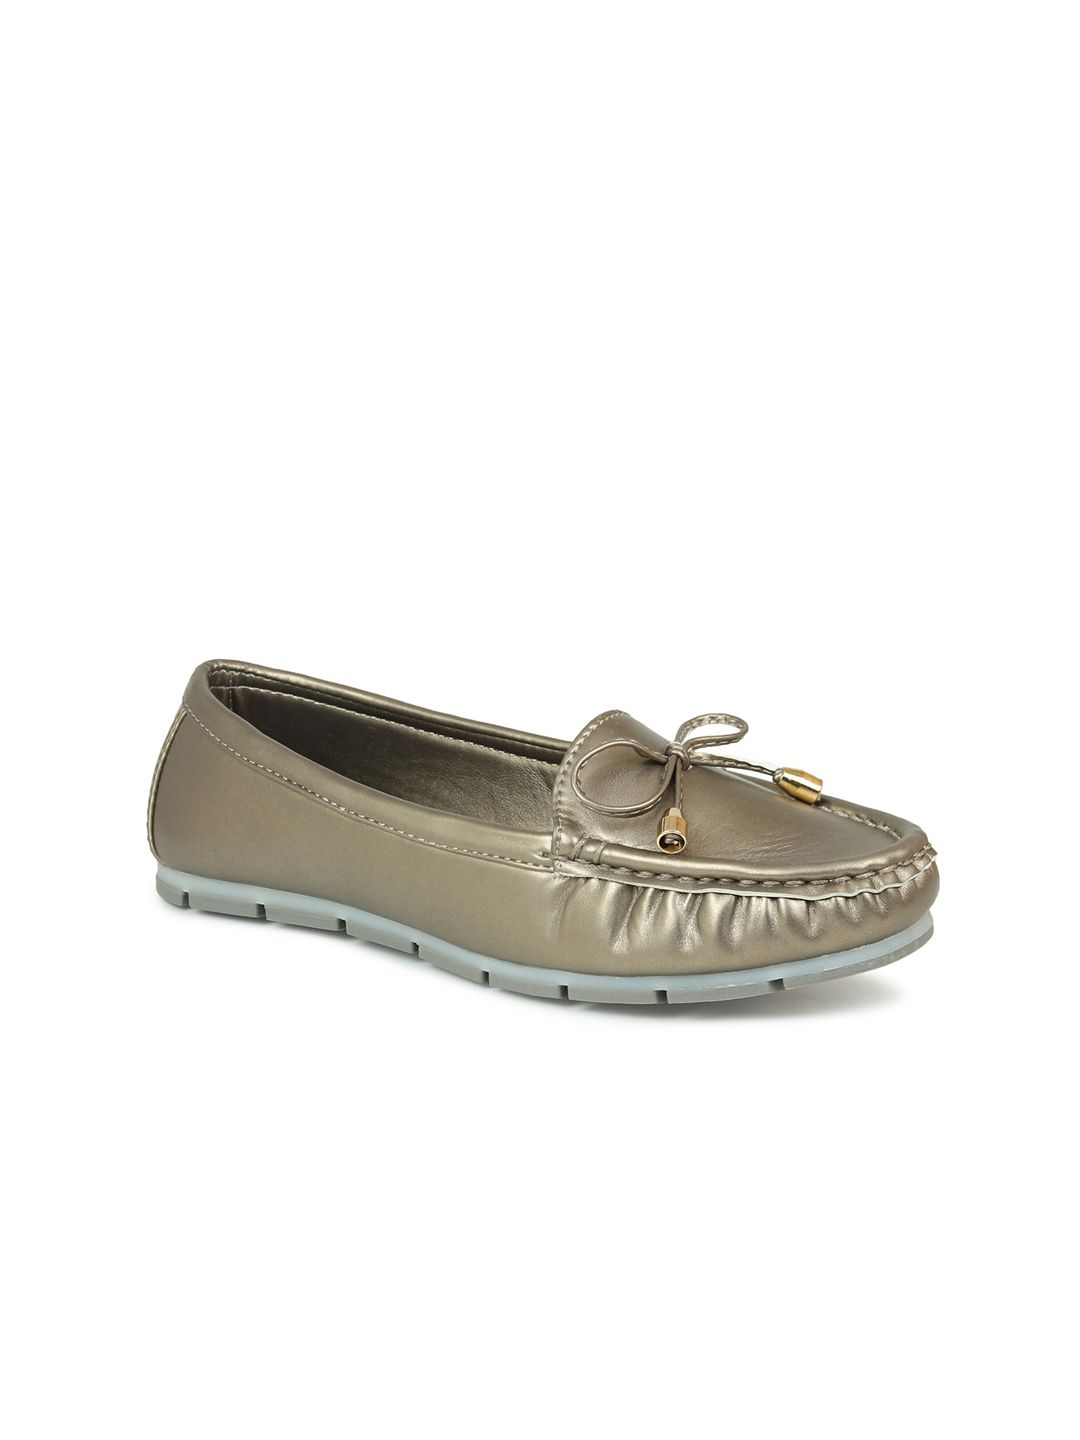 Inc 5 Women Solid Loafers Price in India